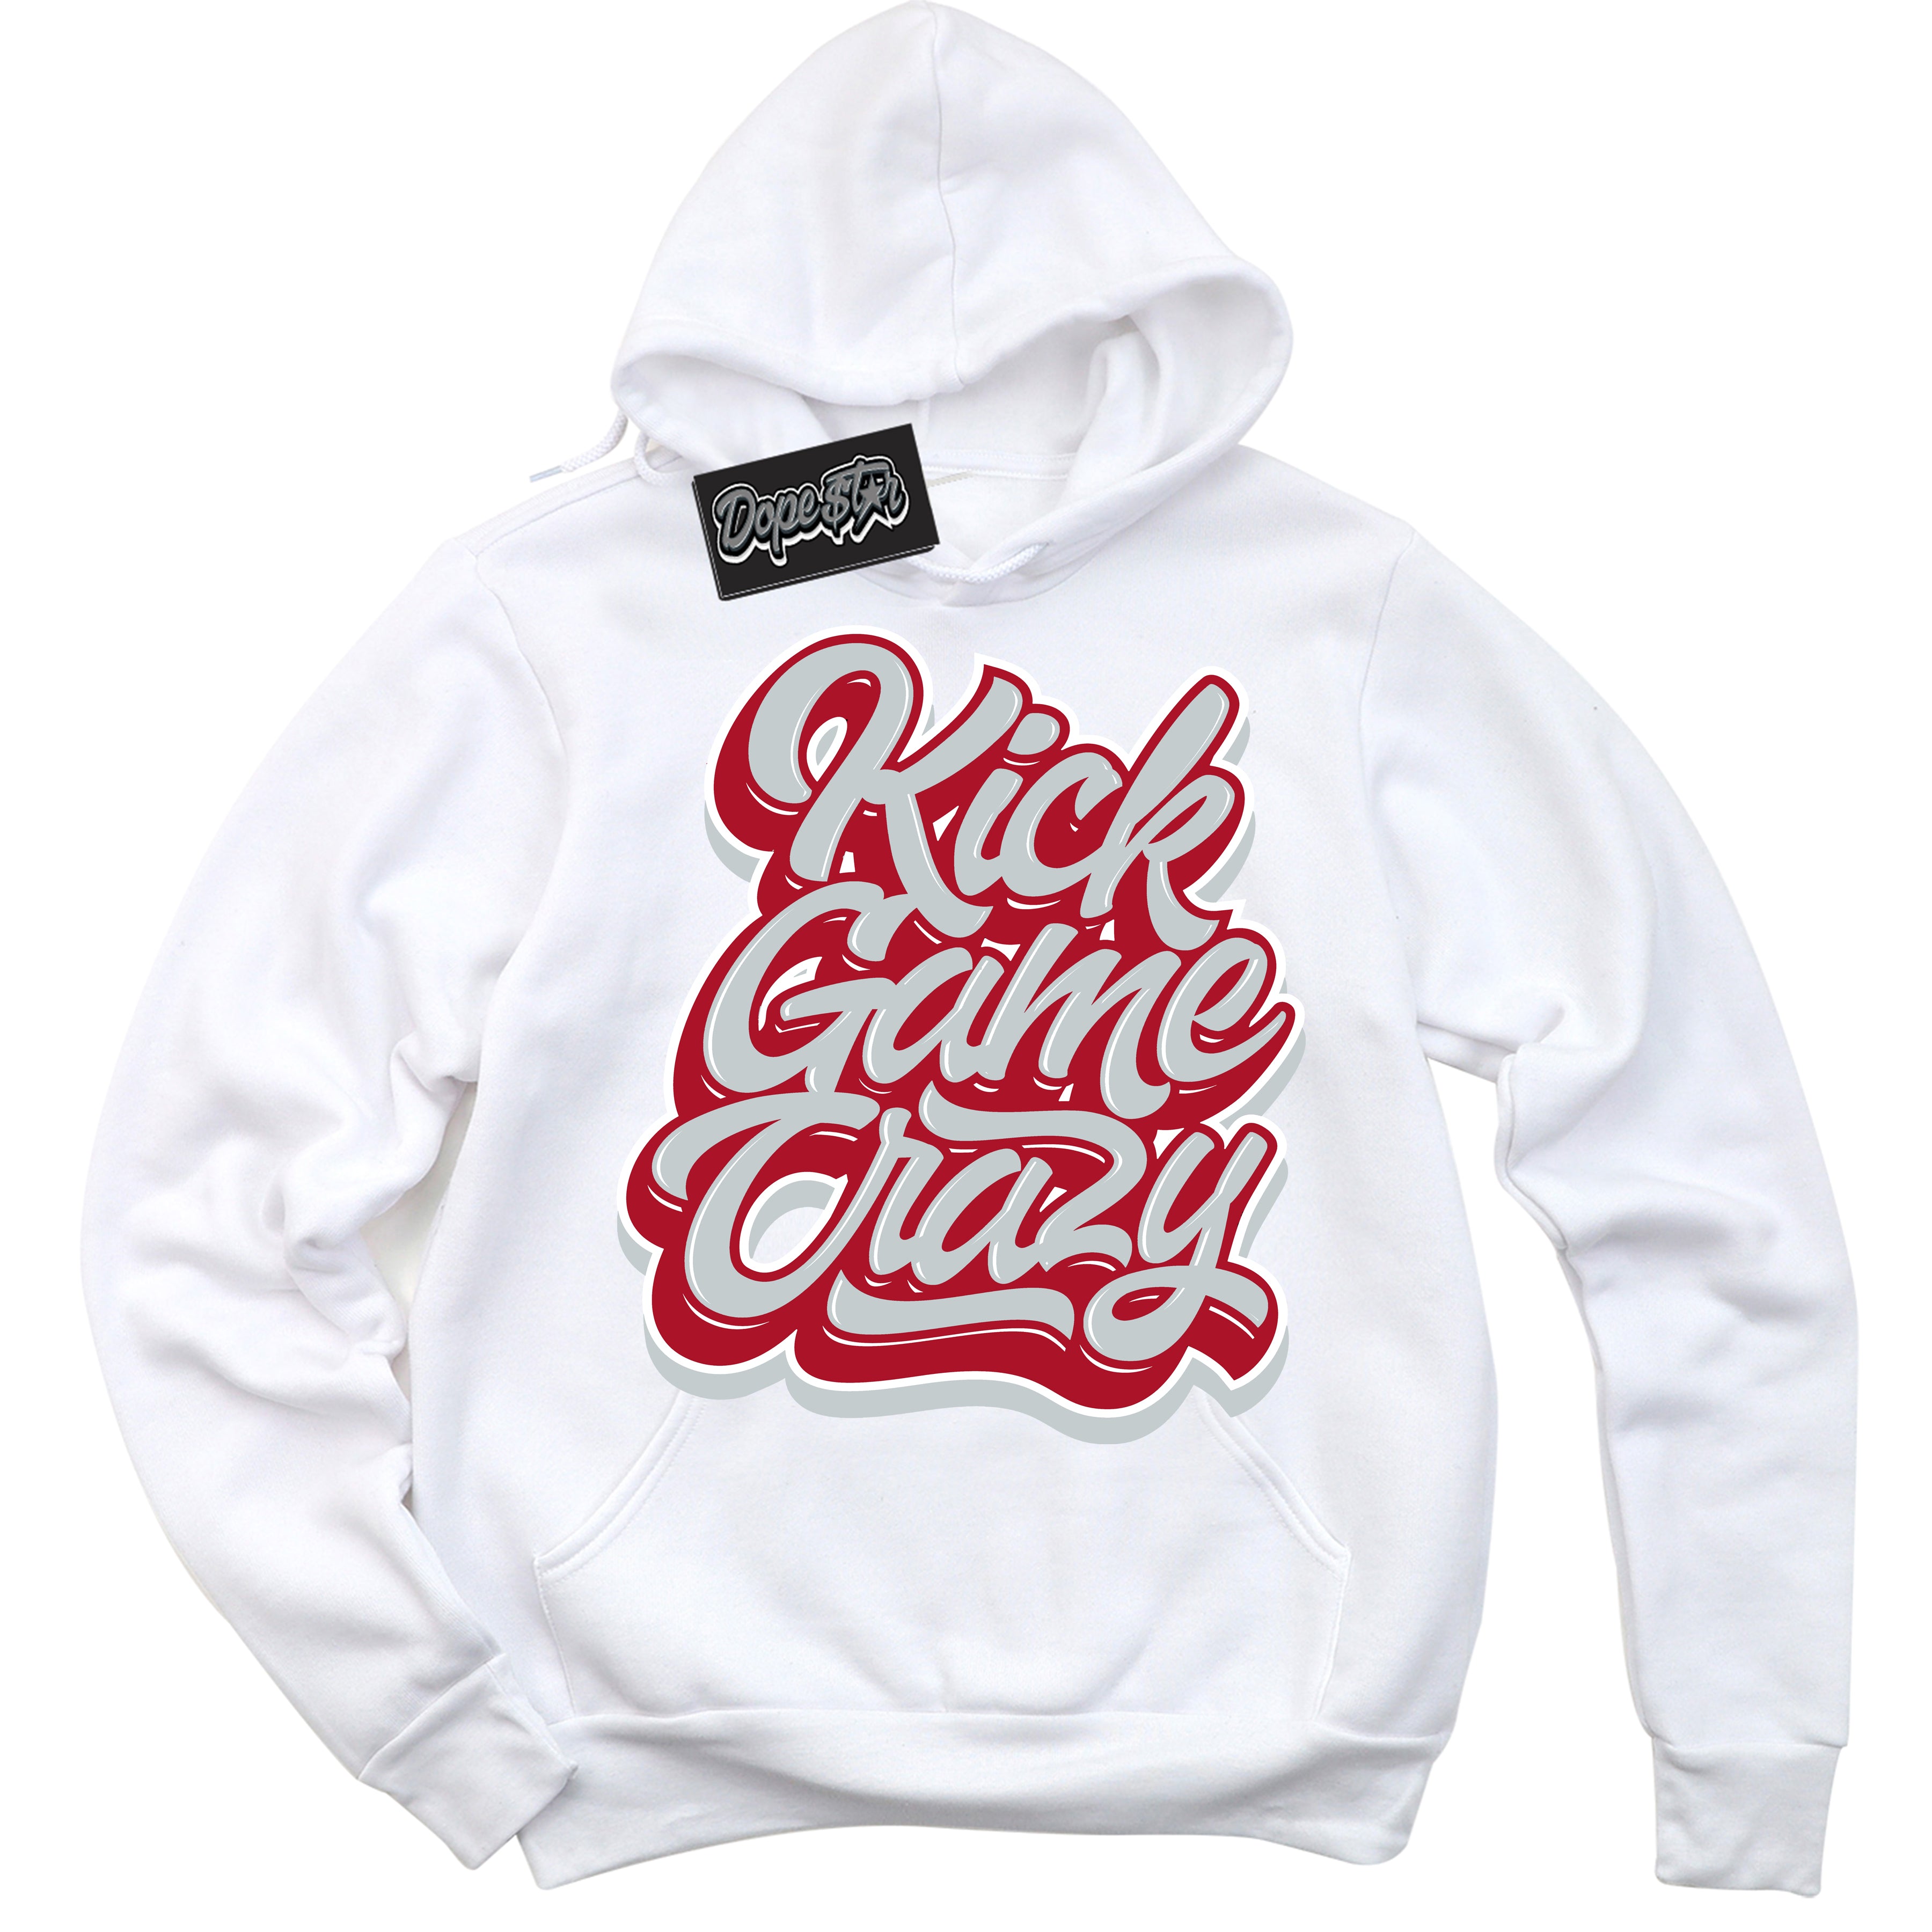 Cool Black Hoodie with “ Kick Game Crazy ”  design that Perfectly Matches  Reverse Ultraman Sneakers.